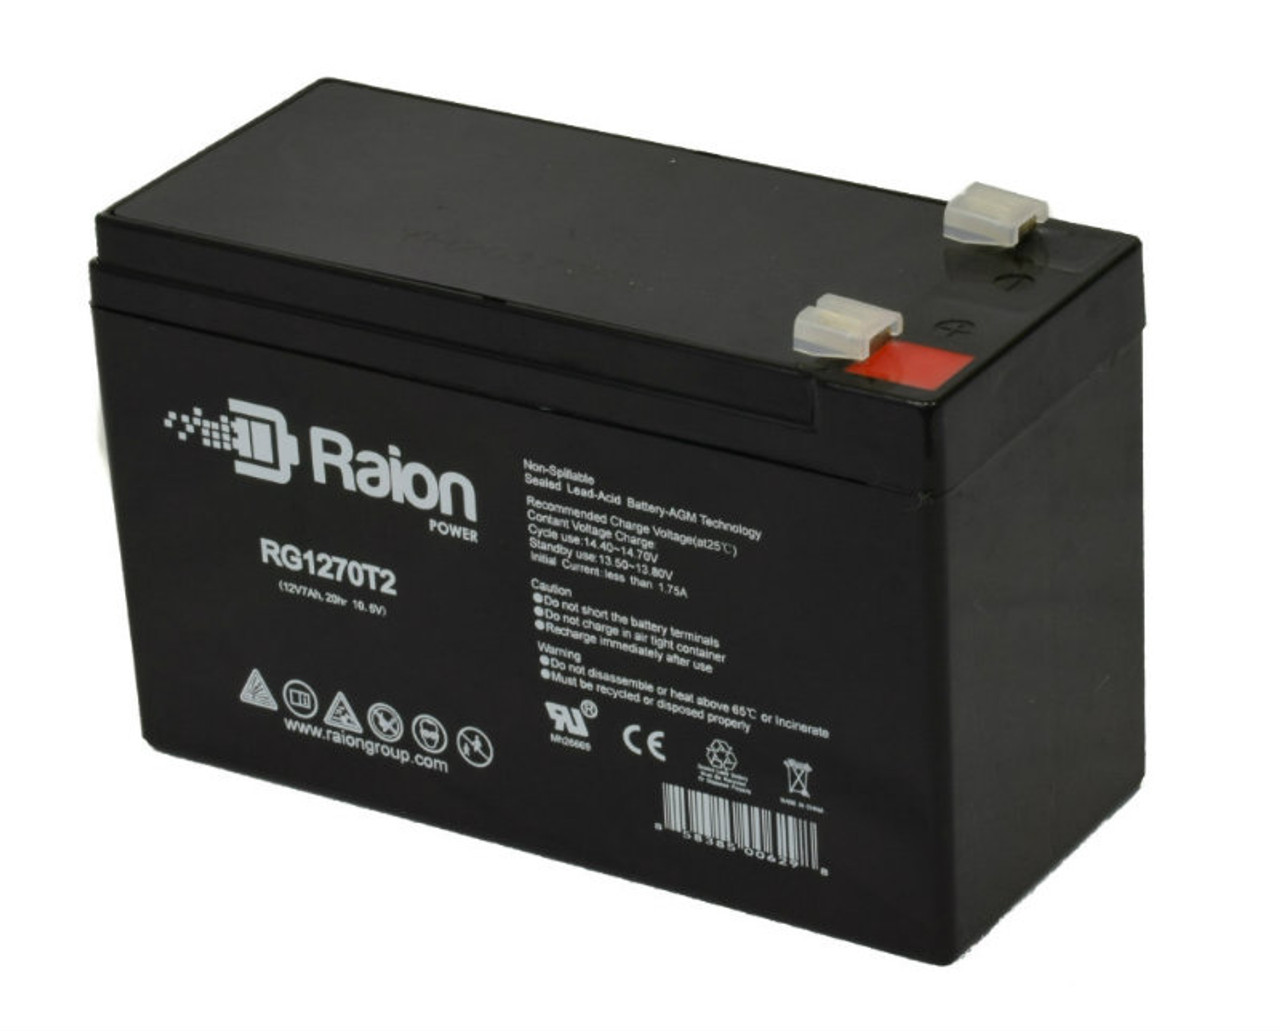 Raion Power RG1270T1 12V 7Ah Non-Spillable Replacement Battery for Amstron AP-1270F1